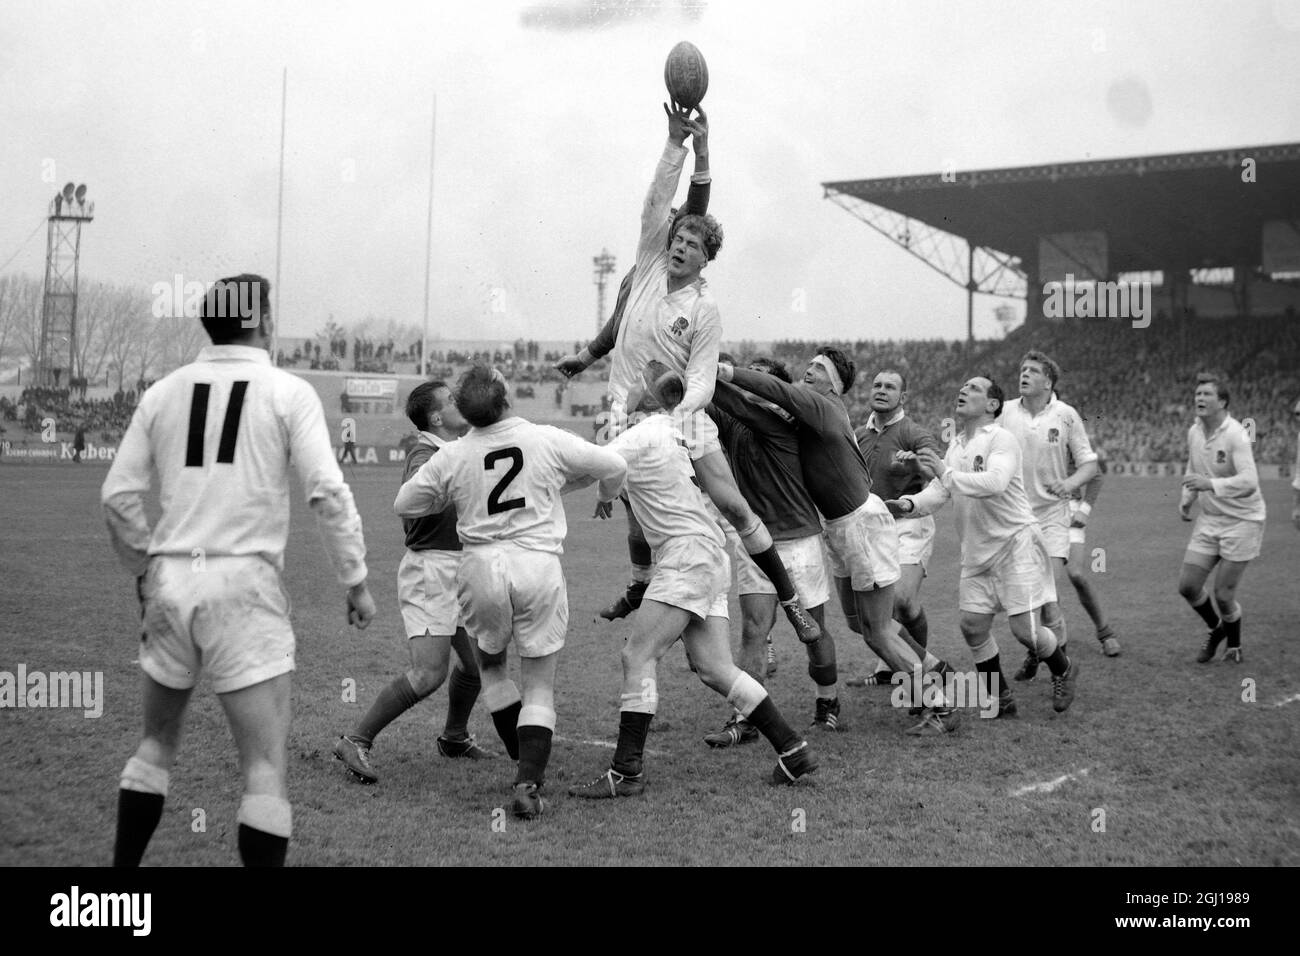 22 FEBRUARY 1964 A LINEOUT DURING THE FIVE NATIONS RUGBY UNION MATCH BETWEEN ENGLAND AND FRANCE. ENGLAND WON 6-3 AT THE COLOMBES STADIUM, PARIS, FRANCE. Stock Photo